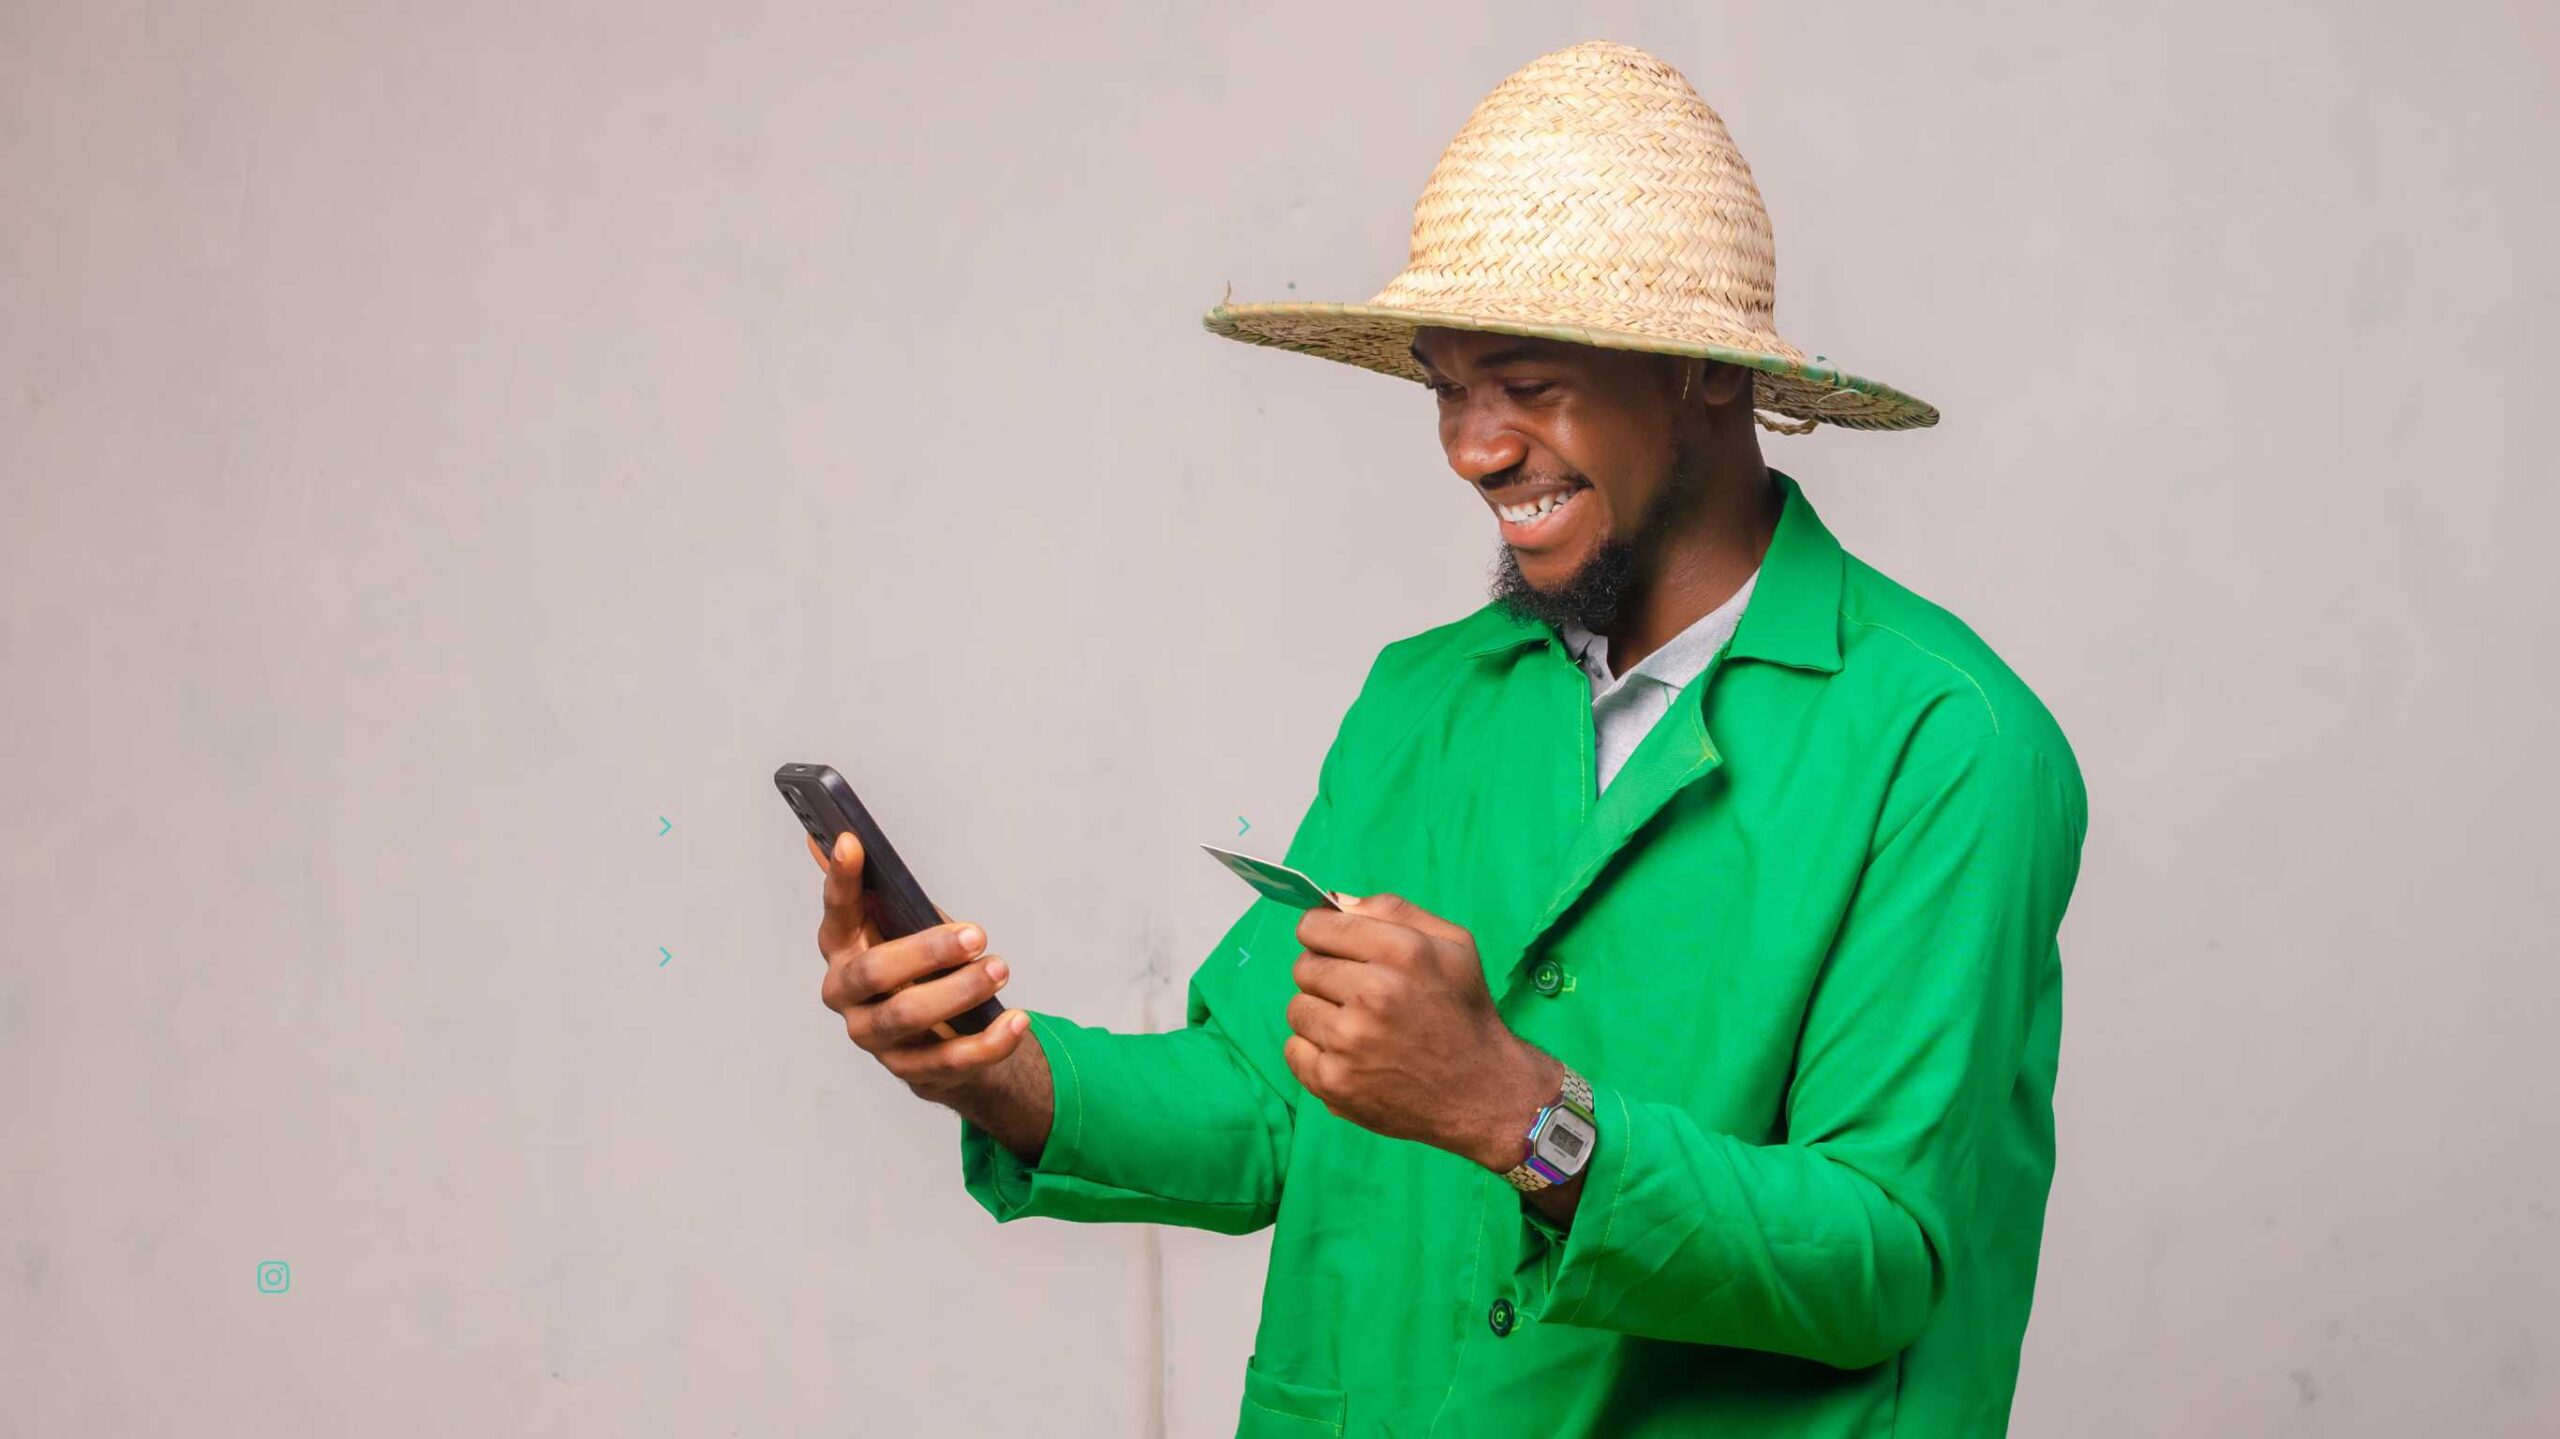 5 apps to send money from the UK to Africa